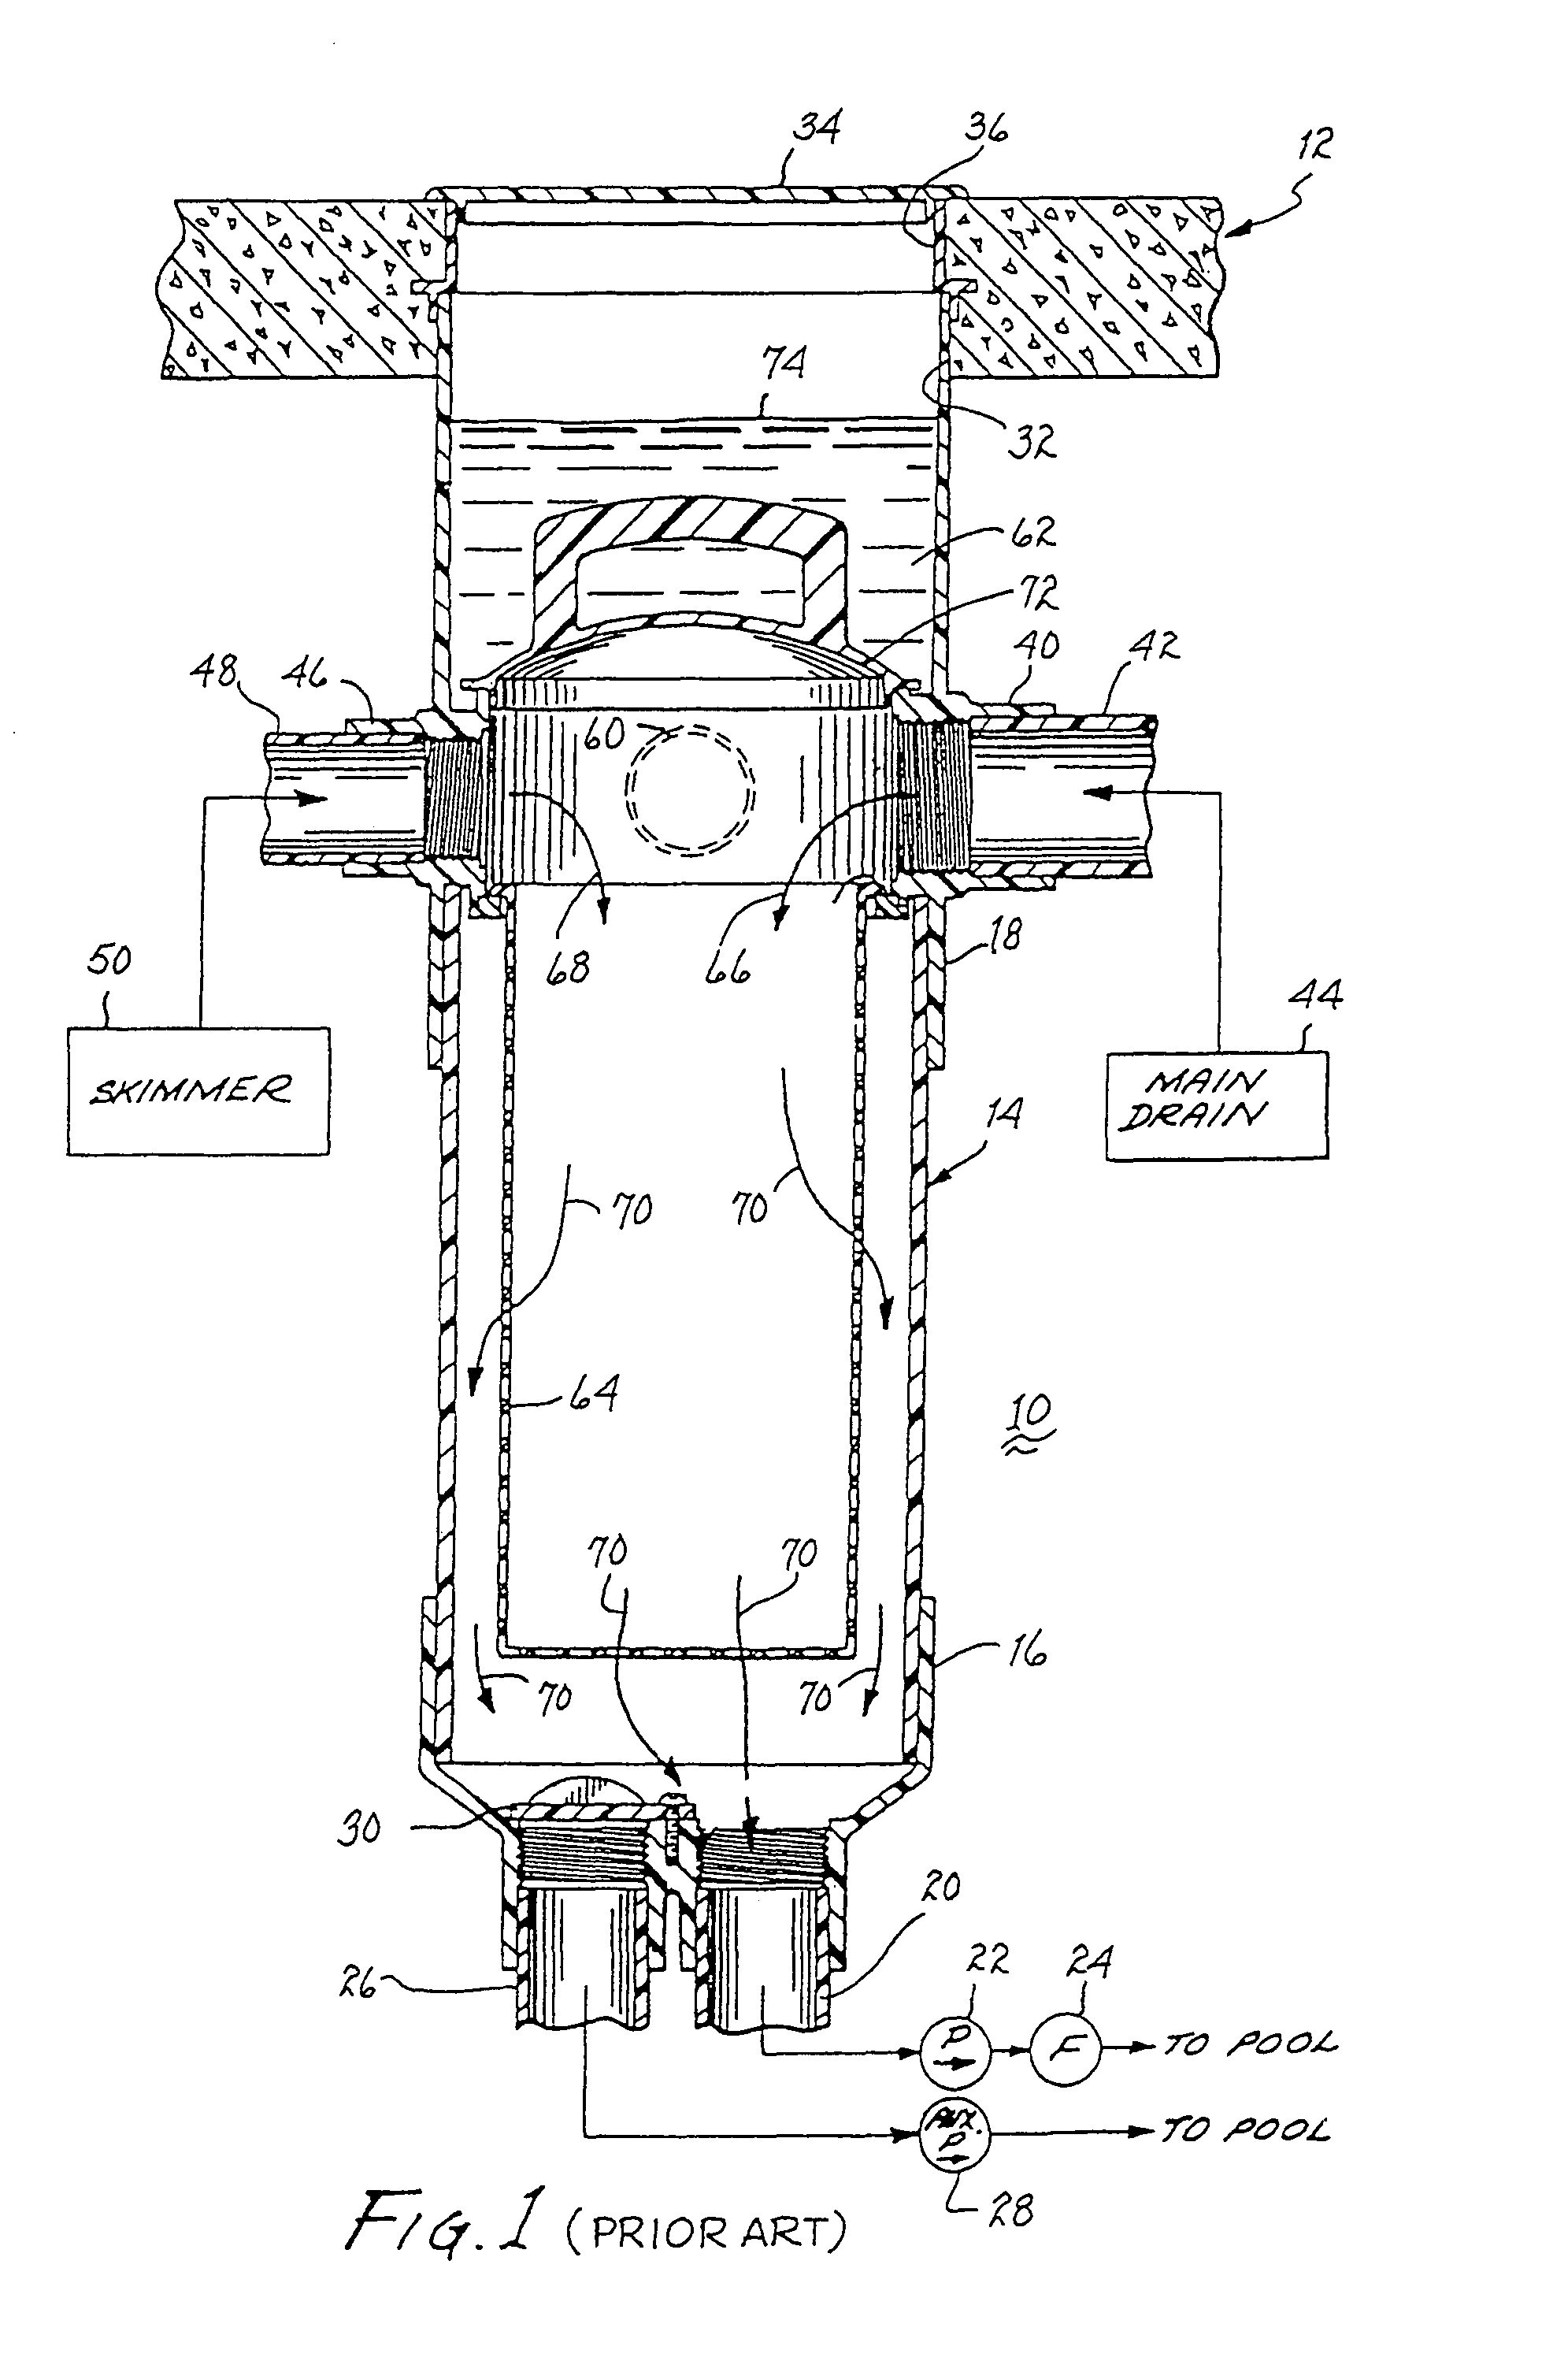 Method for relieving suction force in a pool drain